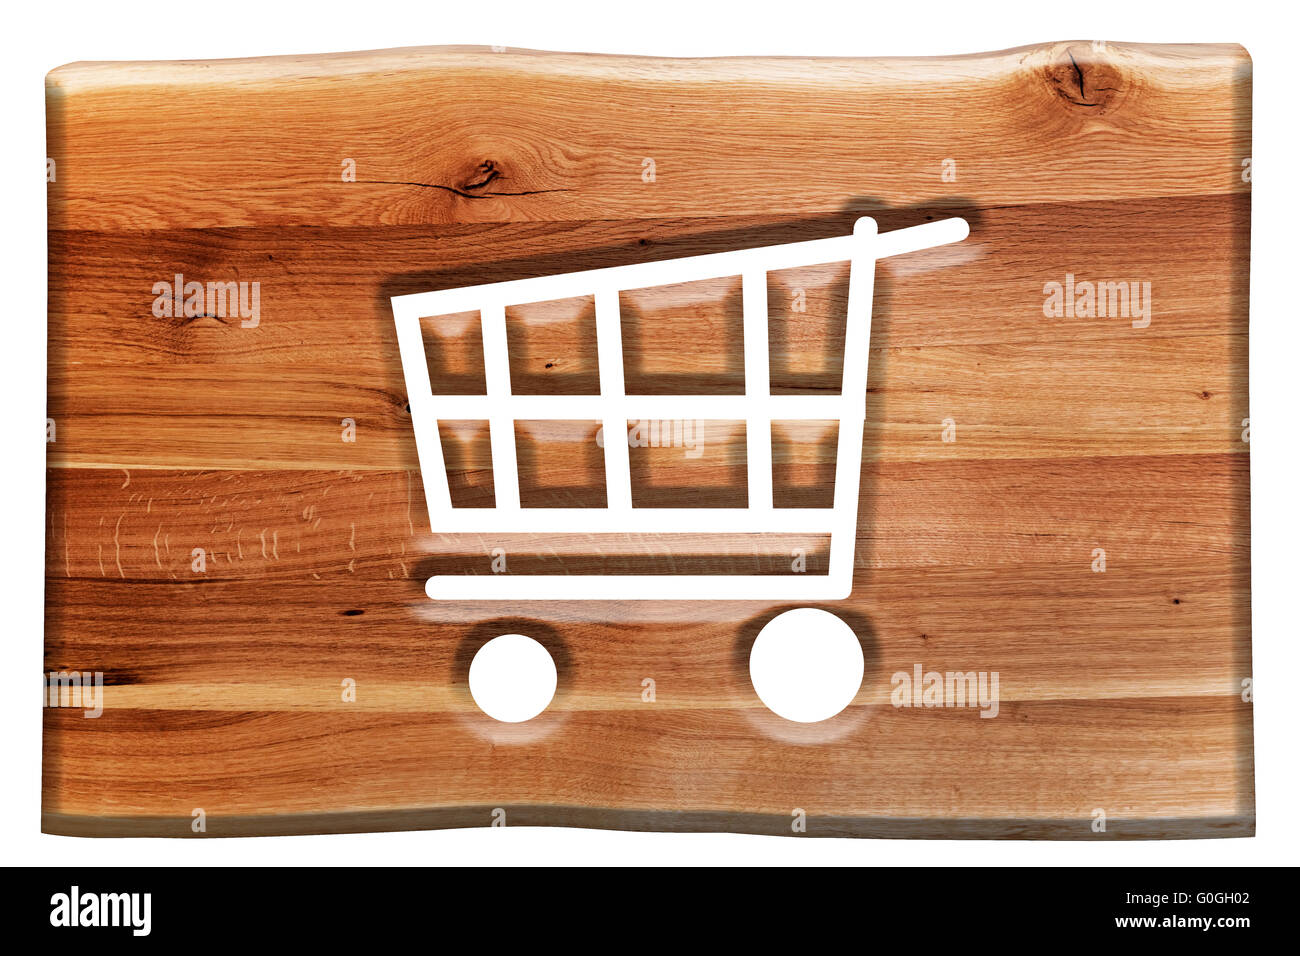 Shopping cart sign, symbol cut in wooden board isolated on white. Stock Photo